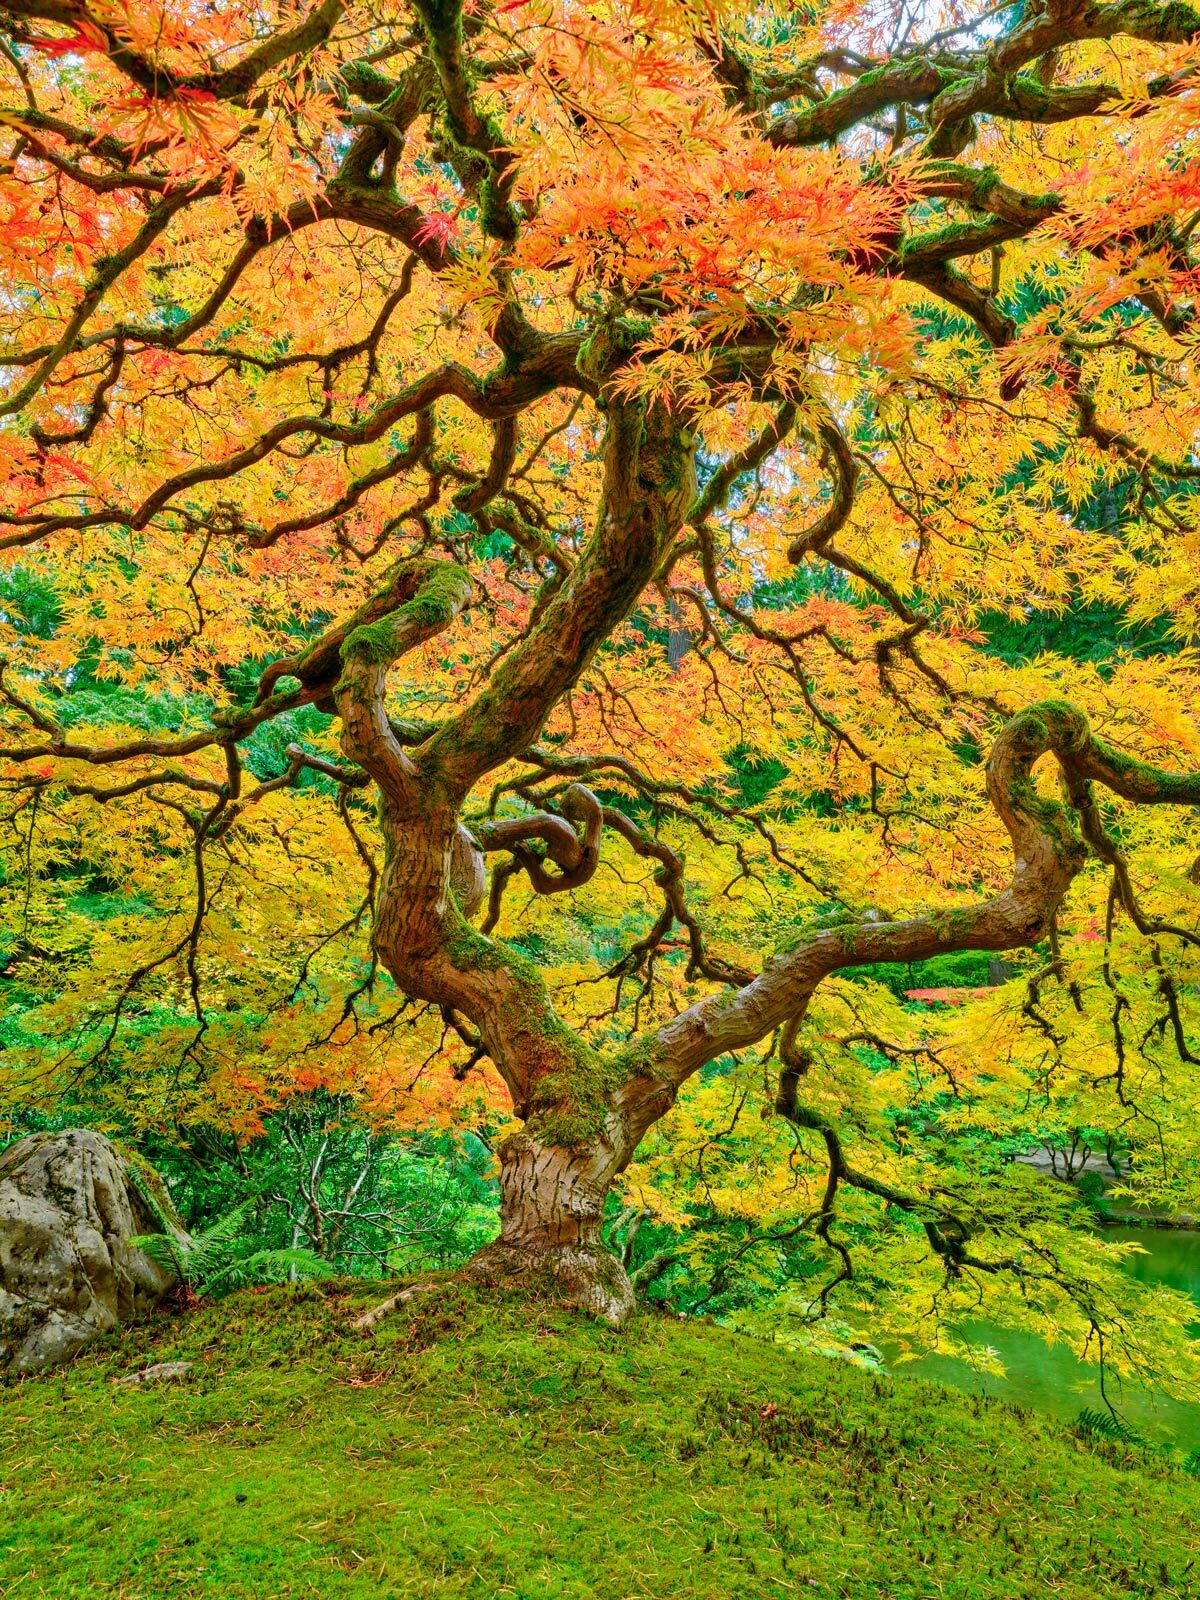 Autumn Elegance is a beautiful fine art photograph of a Japanese Lace Maple in the Portland Japanese Garden captured by photographer Andrew Shoemaker 